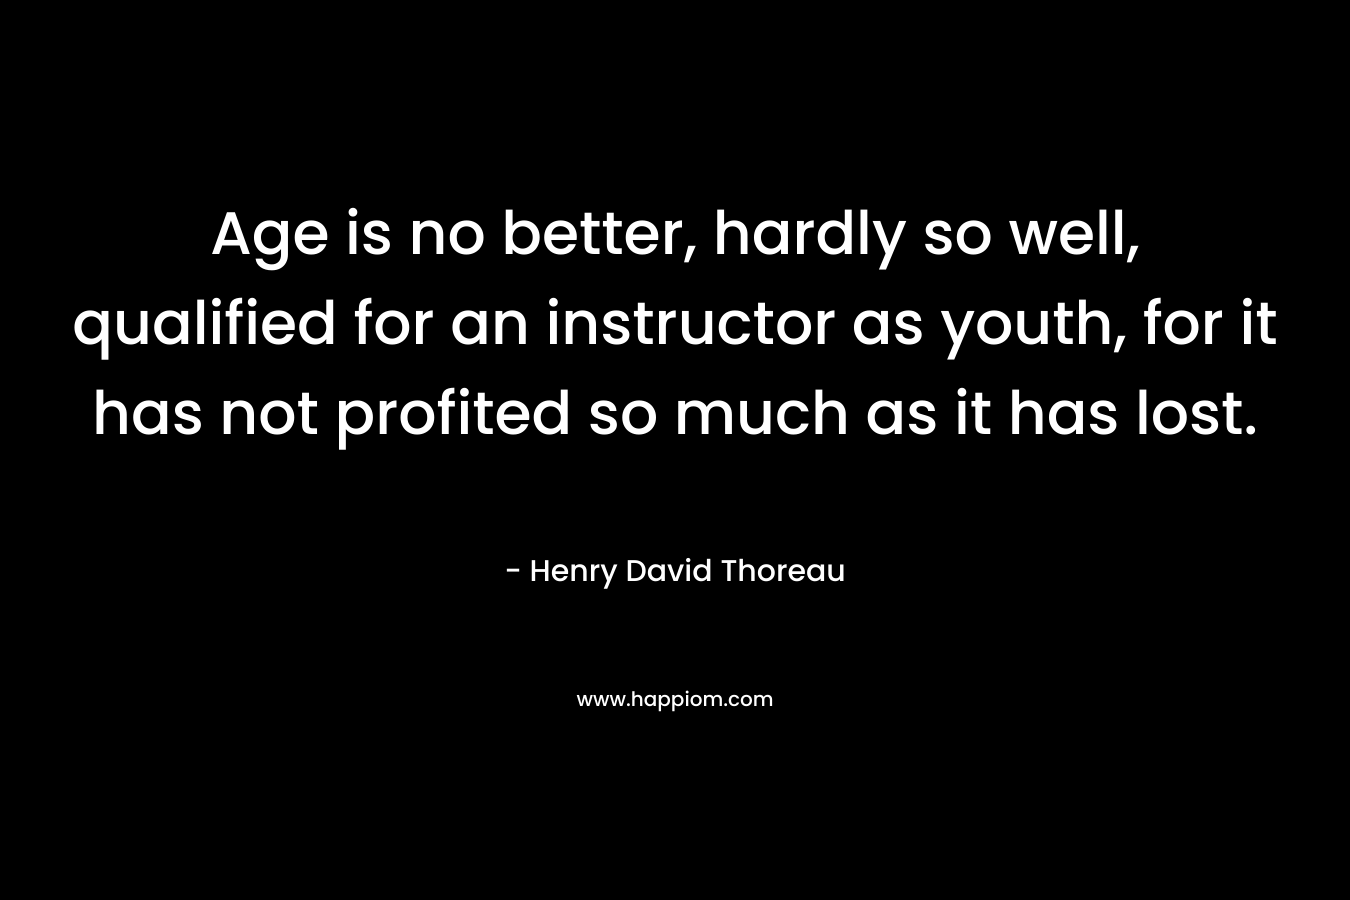 Age is no better, hardly so well, qualified for an instructor as youth, for it has not profited so much as it has lost.